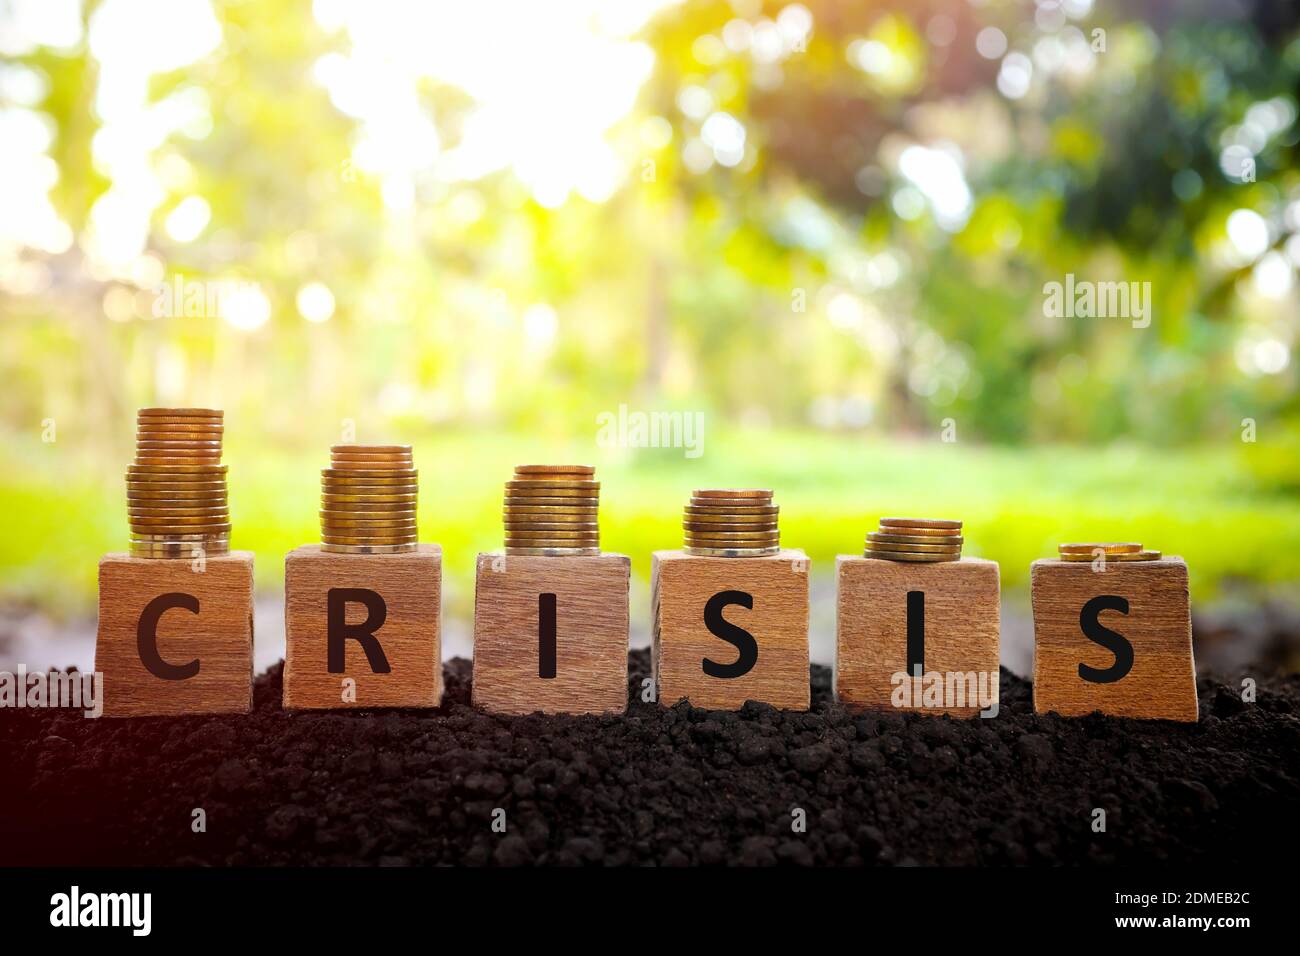 Economic and financial crisis recession and depression concept. Decreasing stack of coins on wooden blocks at sunset. Stock Photo